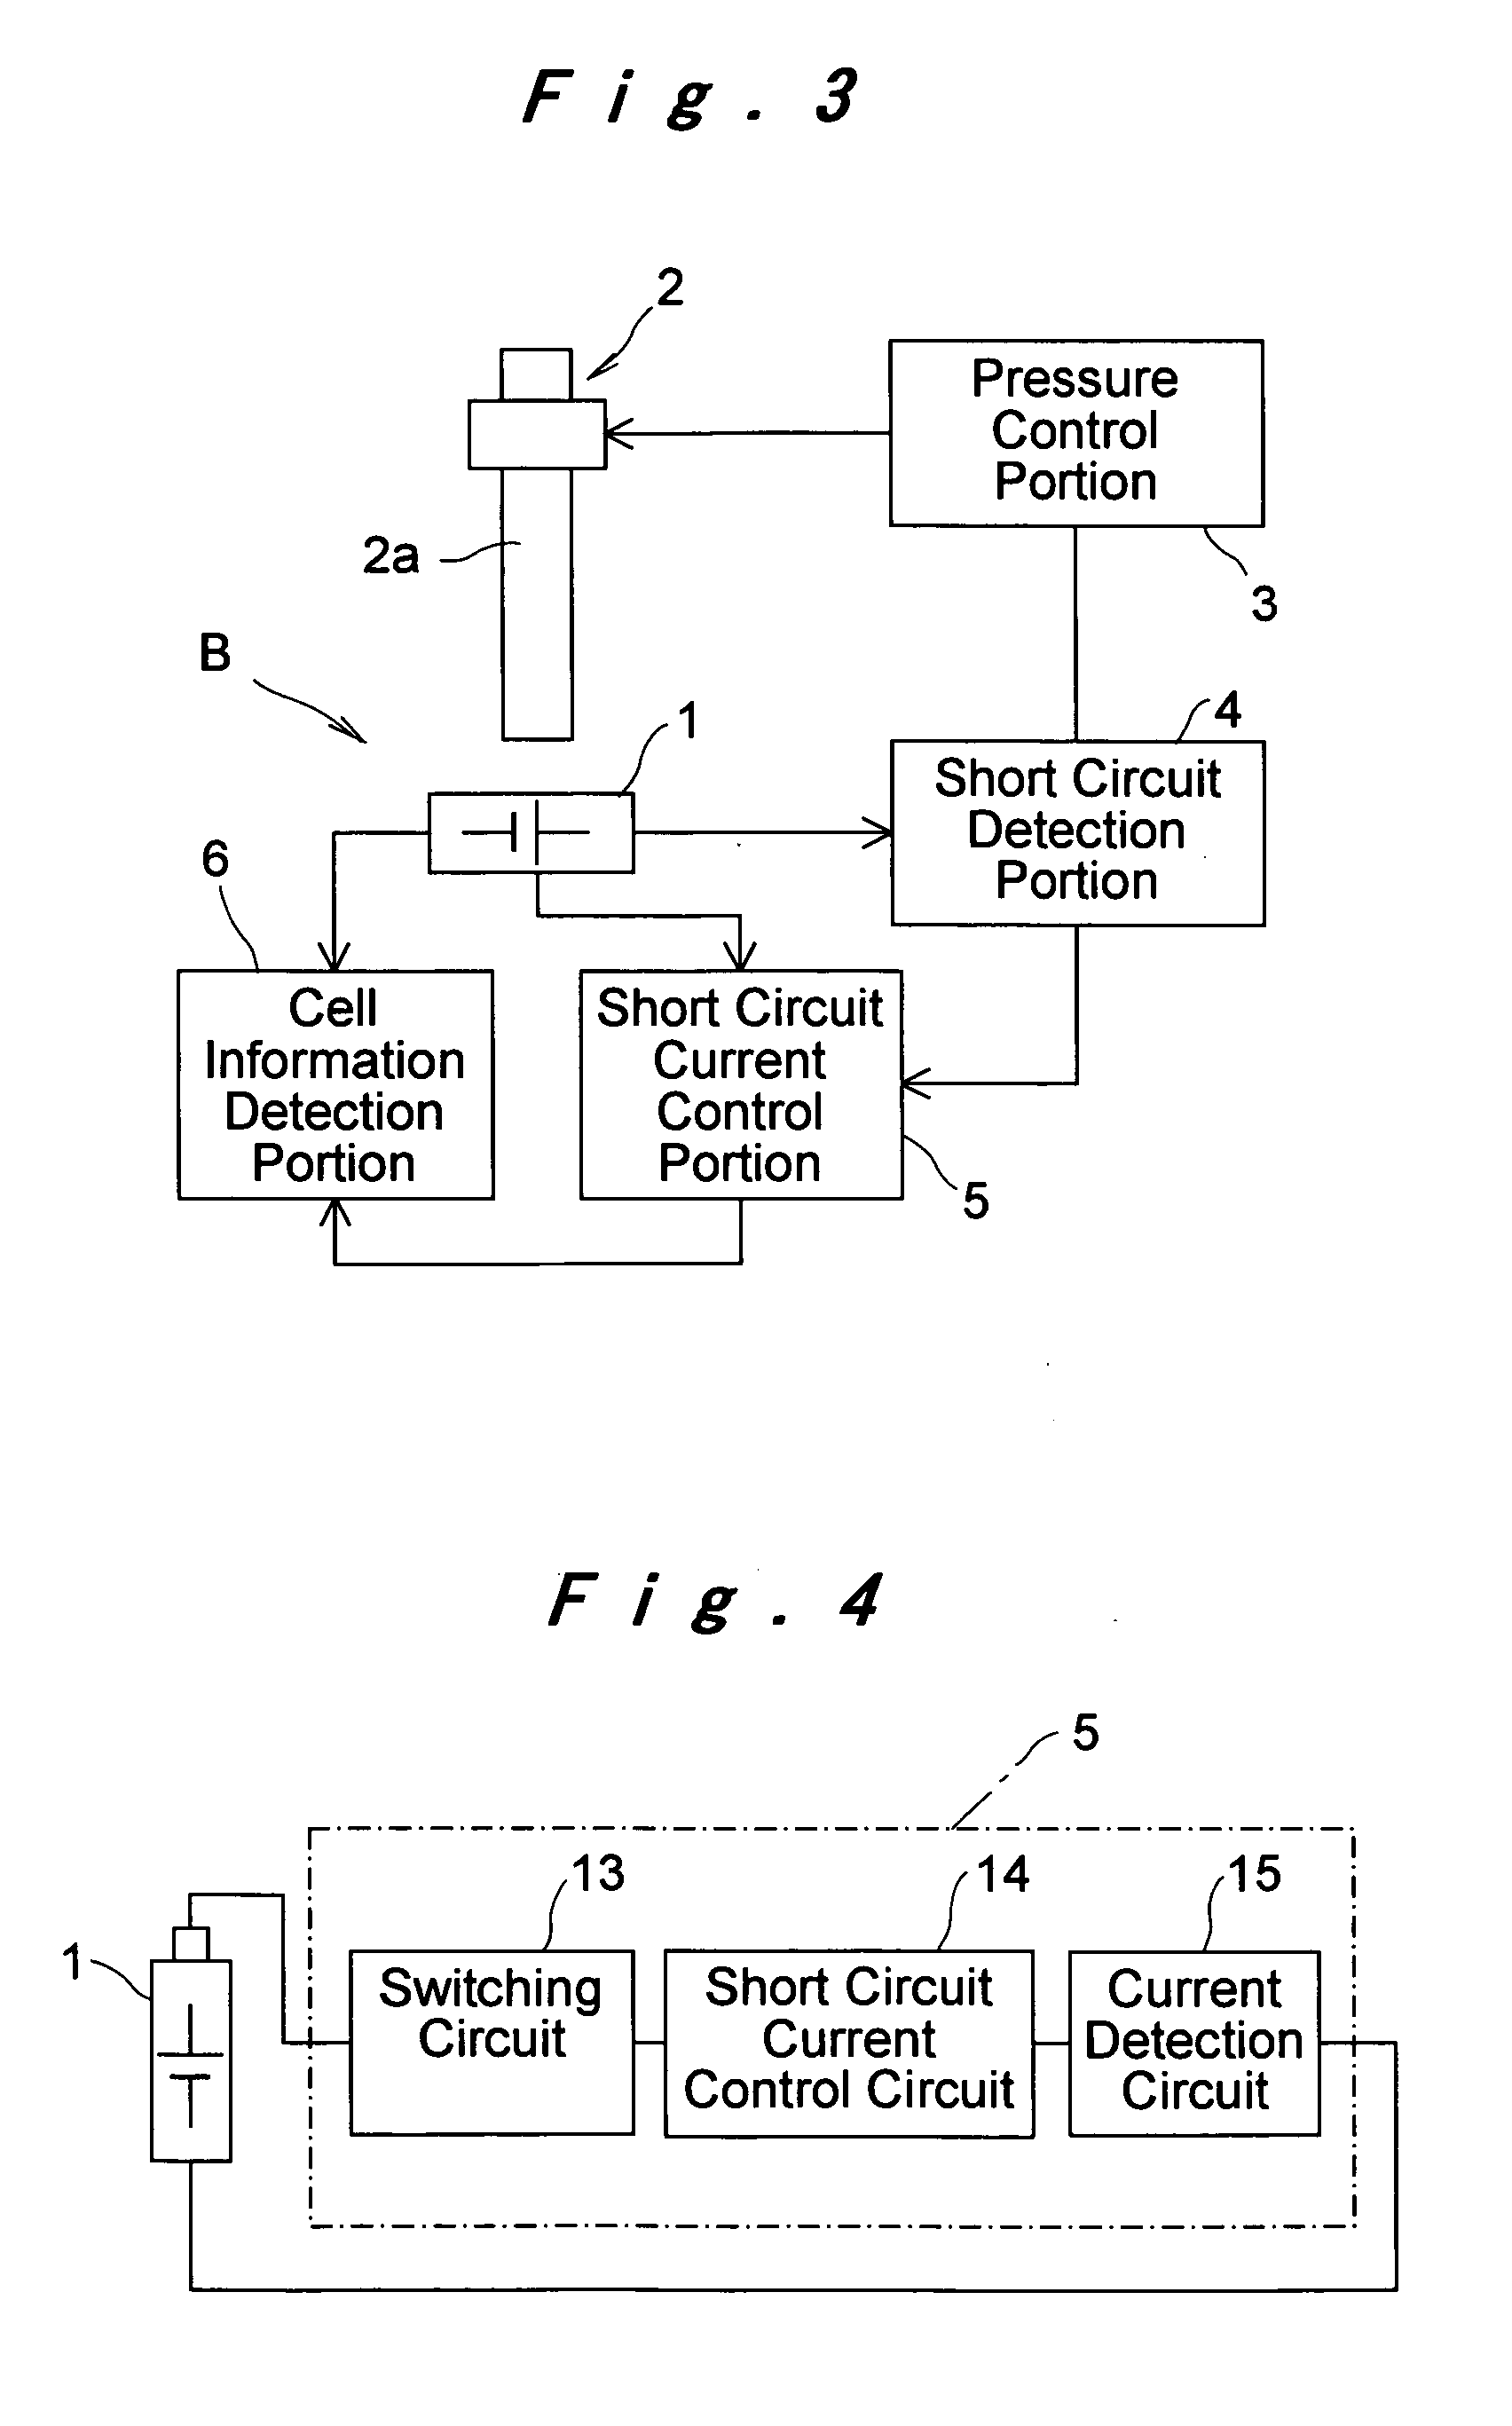 Cell evaluation device